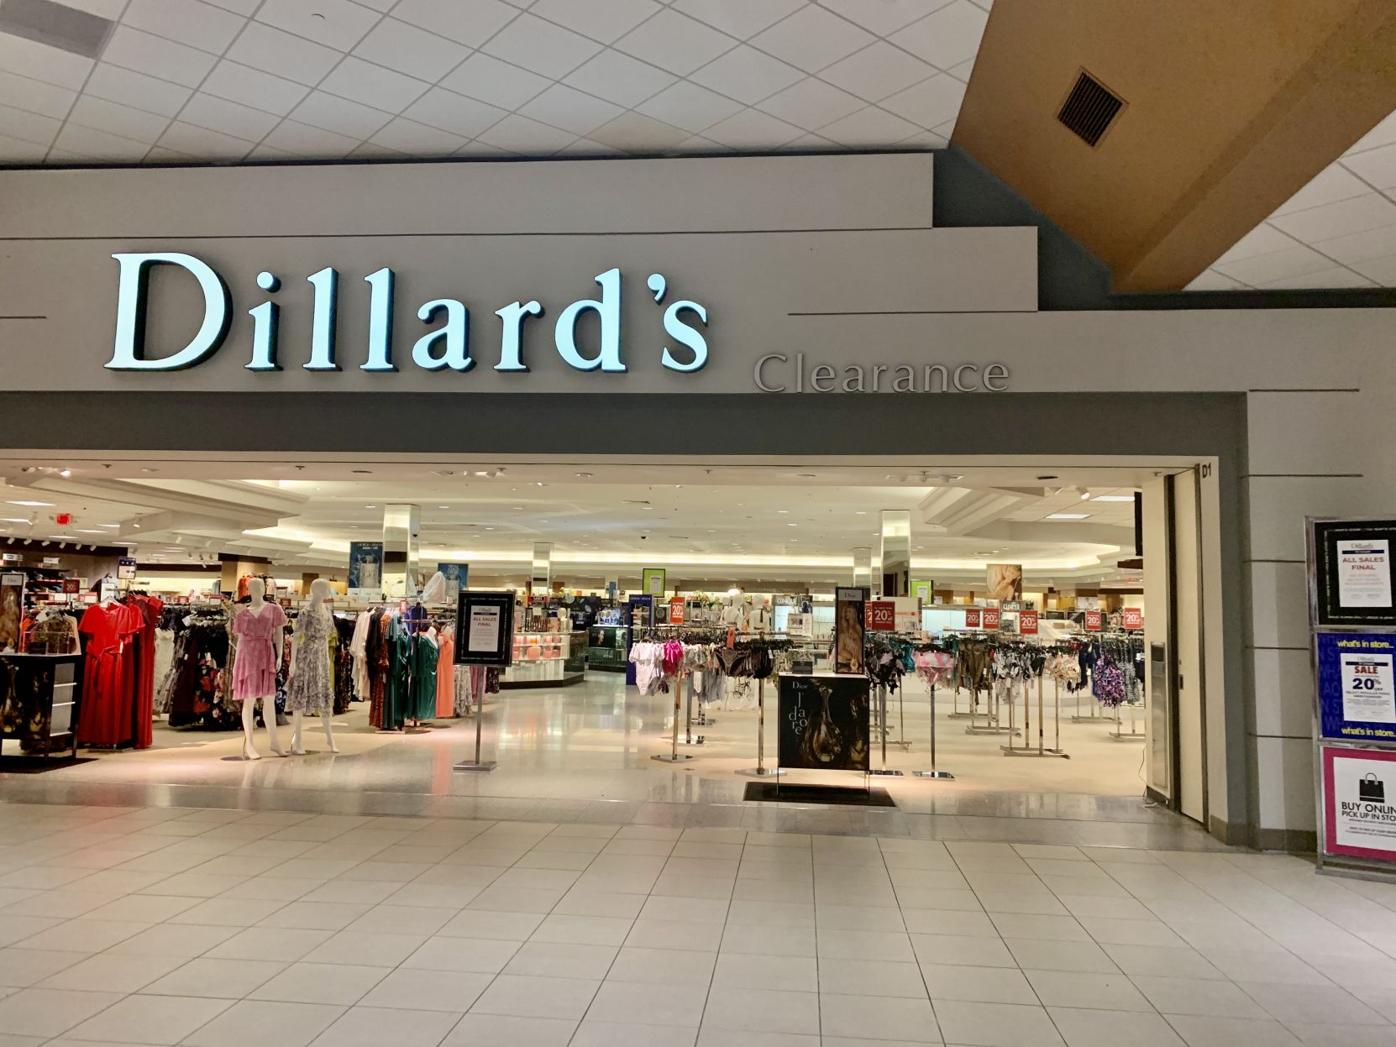 The Vicksburg Mall - Dillard's Clearance at Vicksburg Mall wants to thank  everyone for their response to the great sales that they have provided.  Begining Thursday, June 4th and running through Sunday